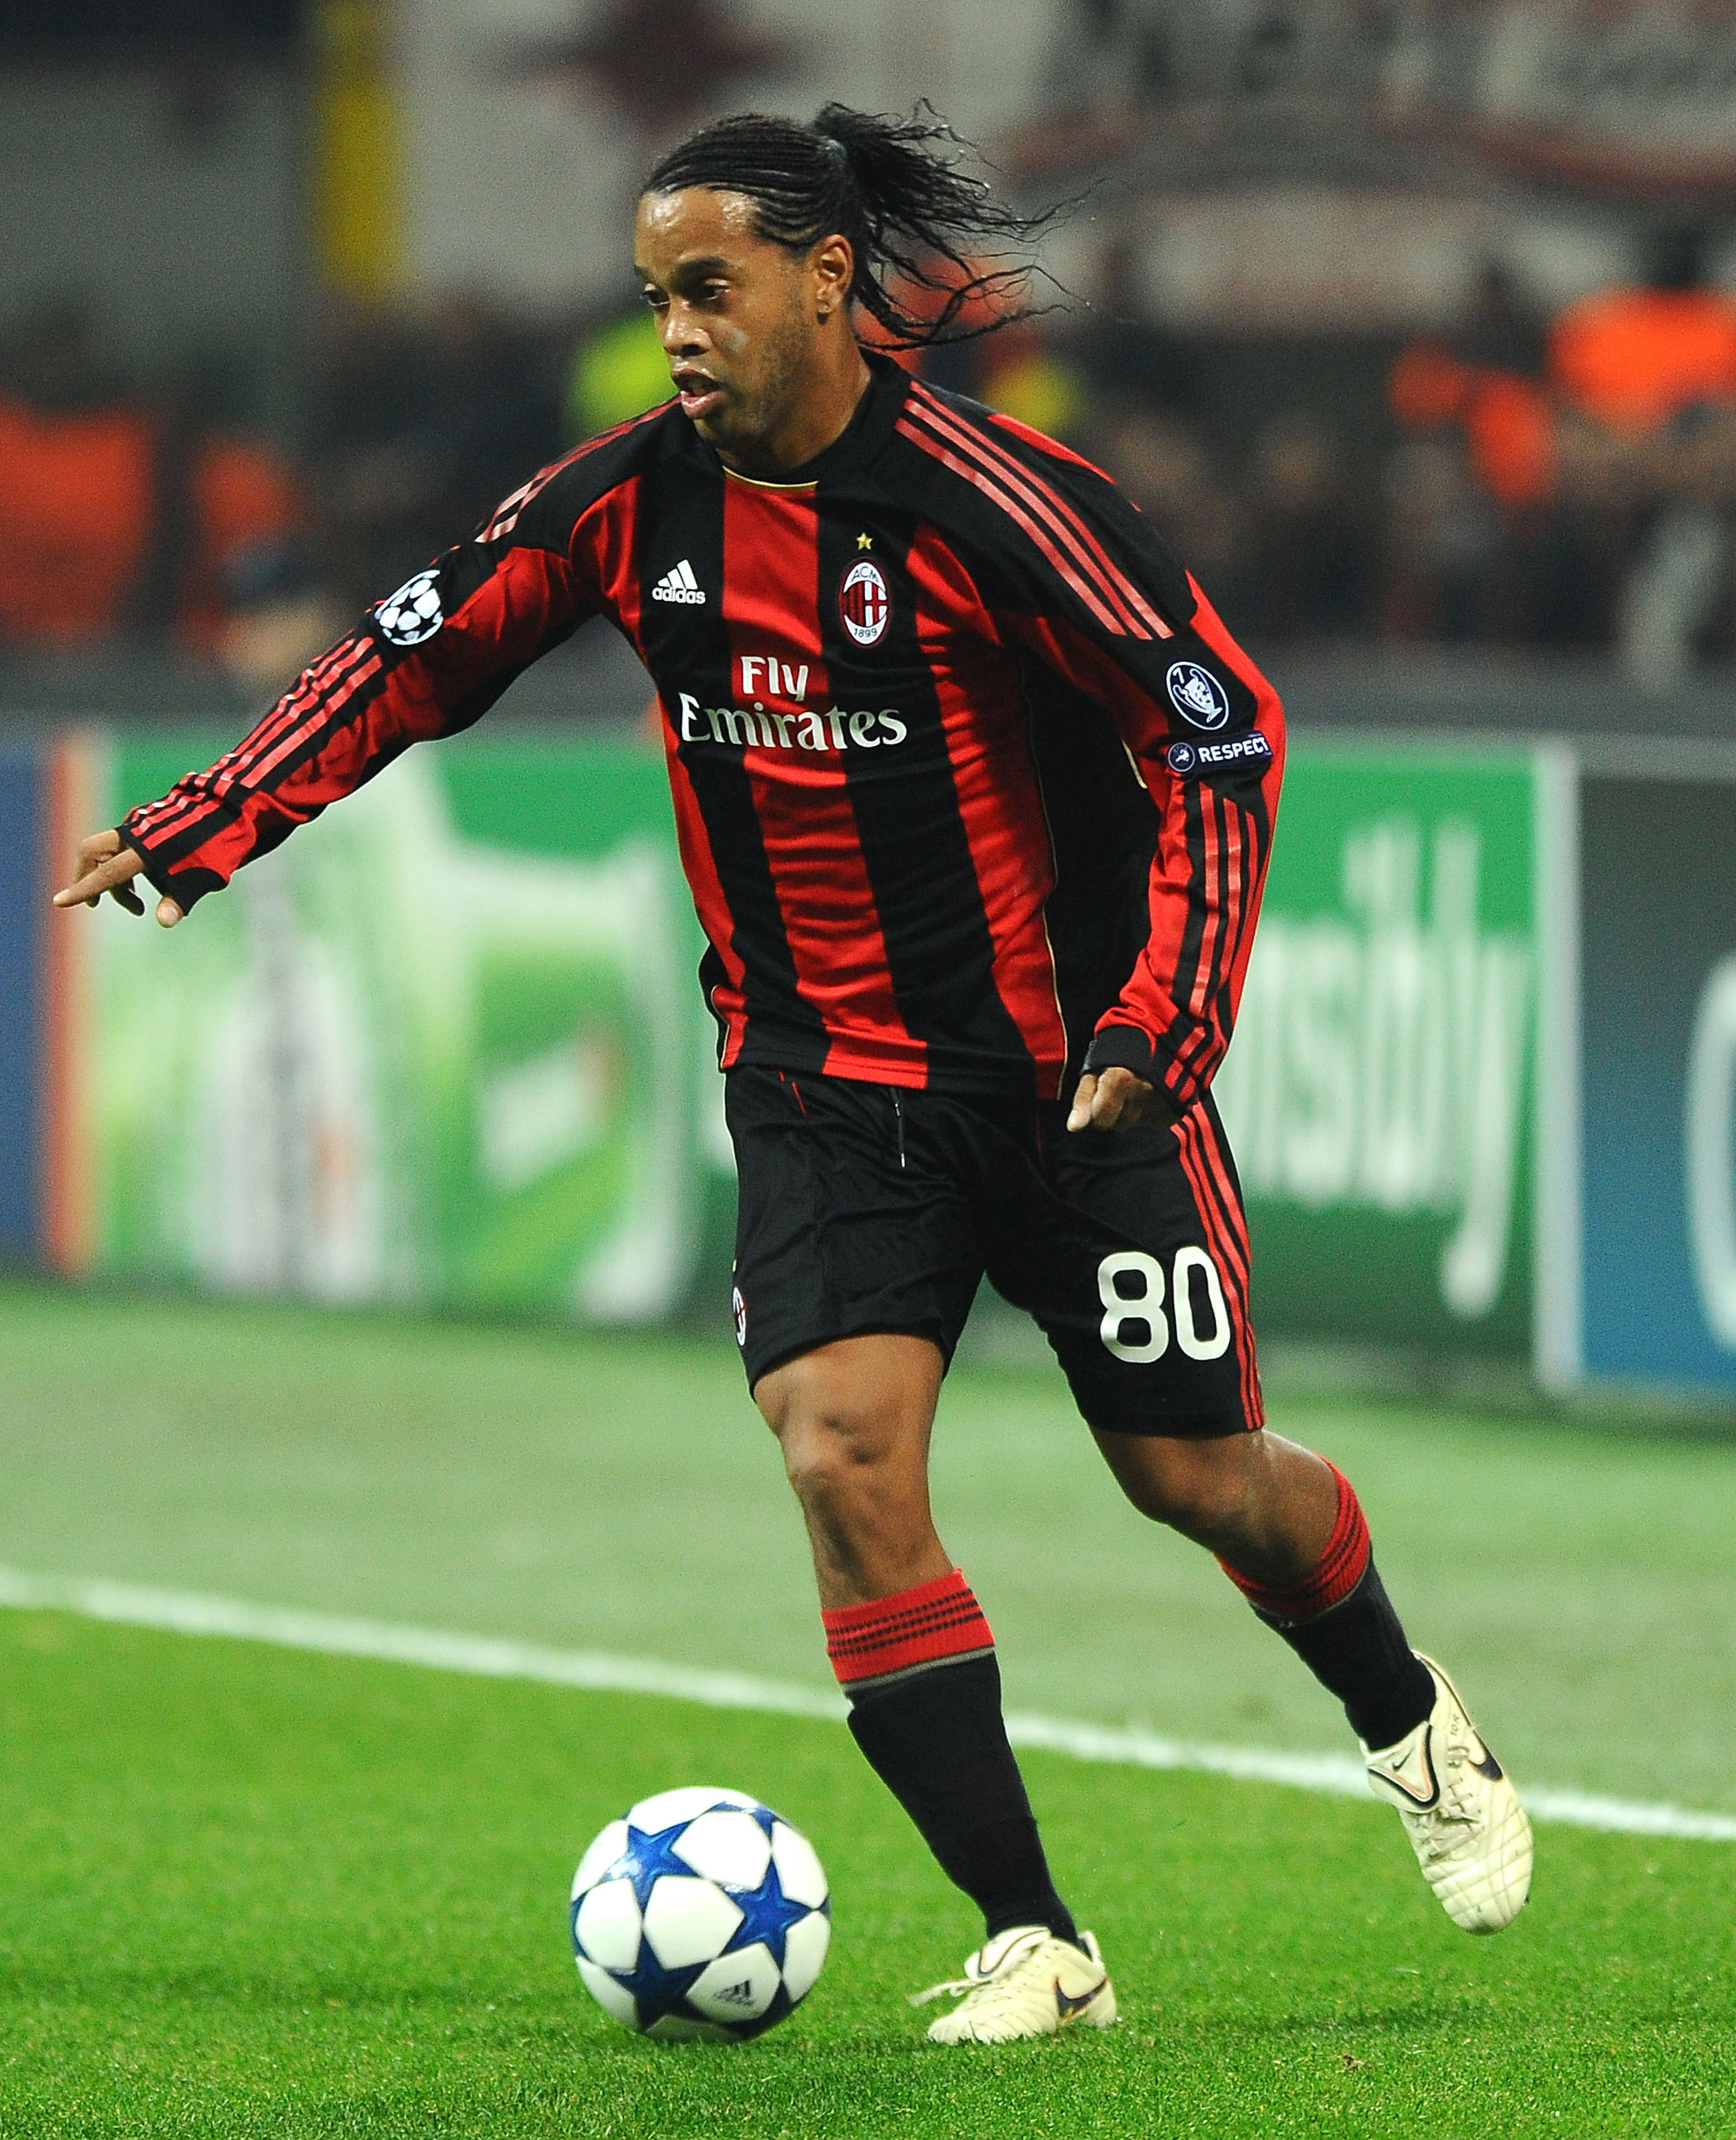 MILAN, ITALY - NOVEMBER 03: Ronaldinho of AC Milan in action during the UEFA Champions League group G match between AC Milan and Real Madrid at Stadio Giuseppe Meazza on November 3, 2010 in Milan, Italy. (Photo by Massimo Cebrelli/Getty Images)